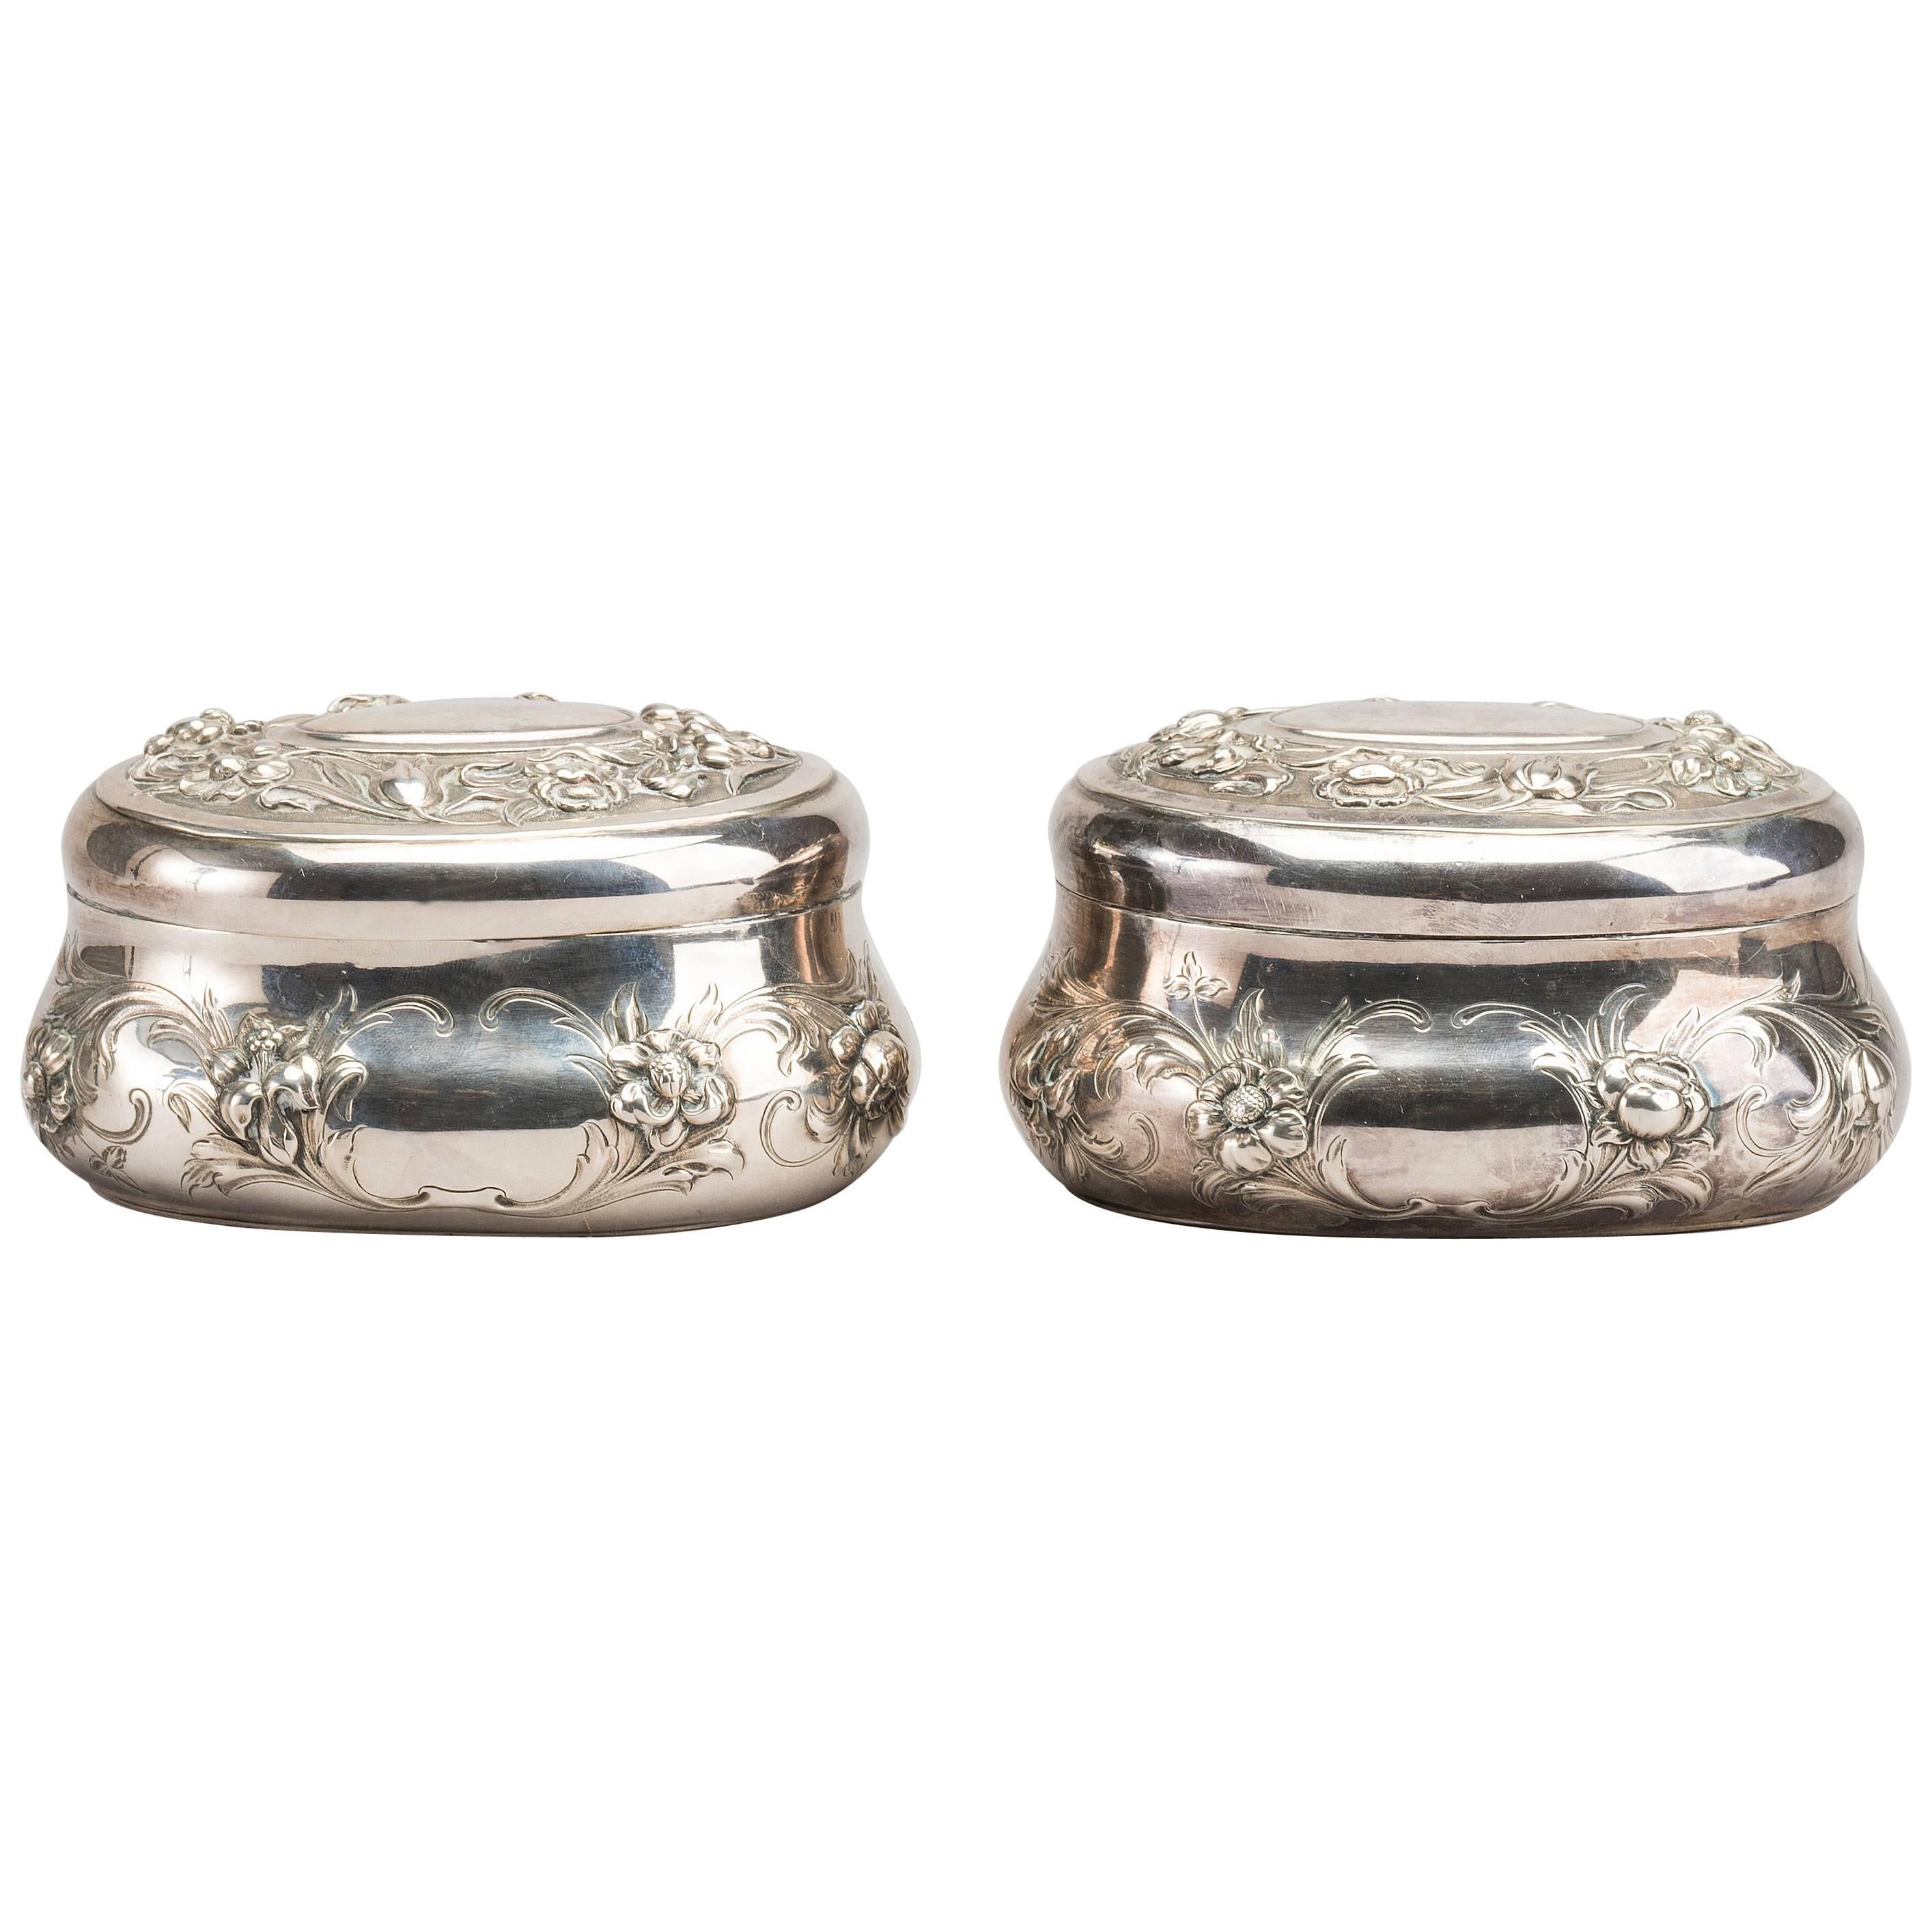 Pair of Silver Boxes by Christian Hammer, Stockholm, 1868